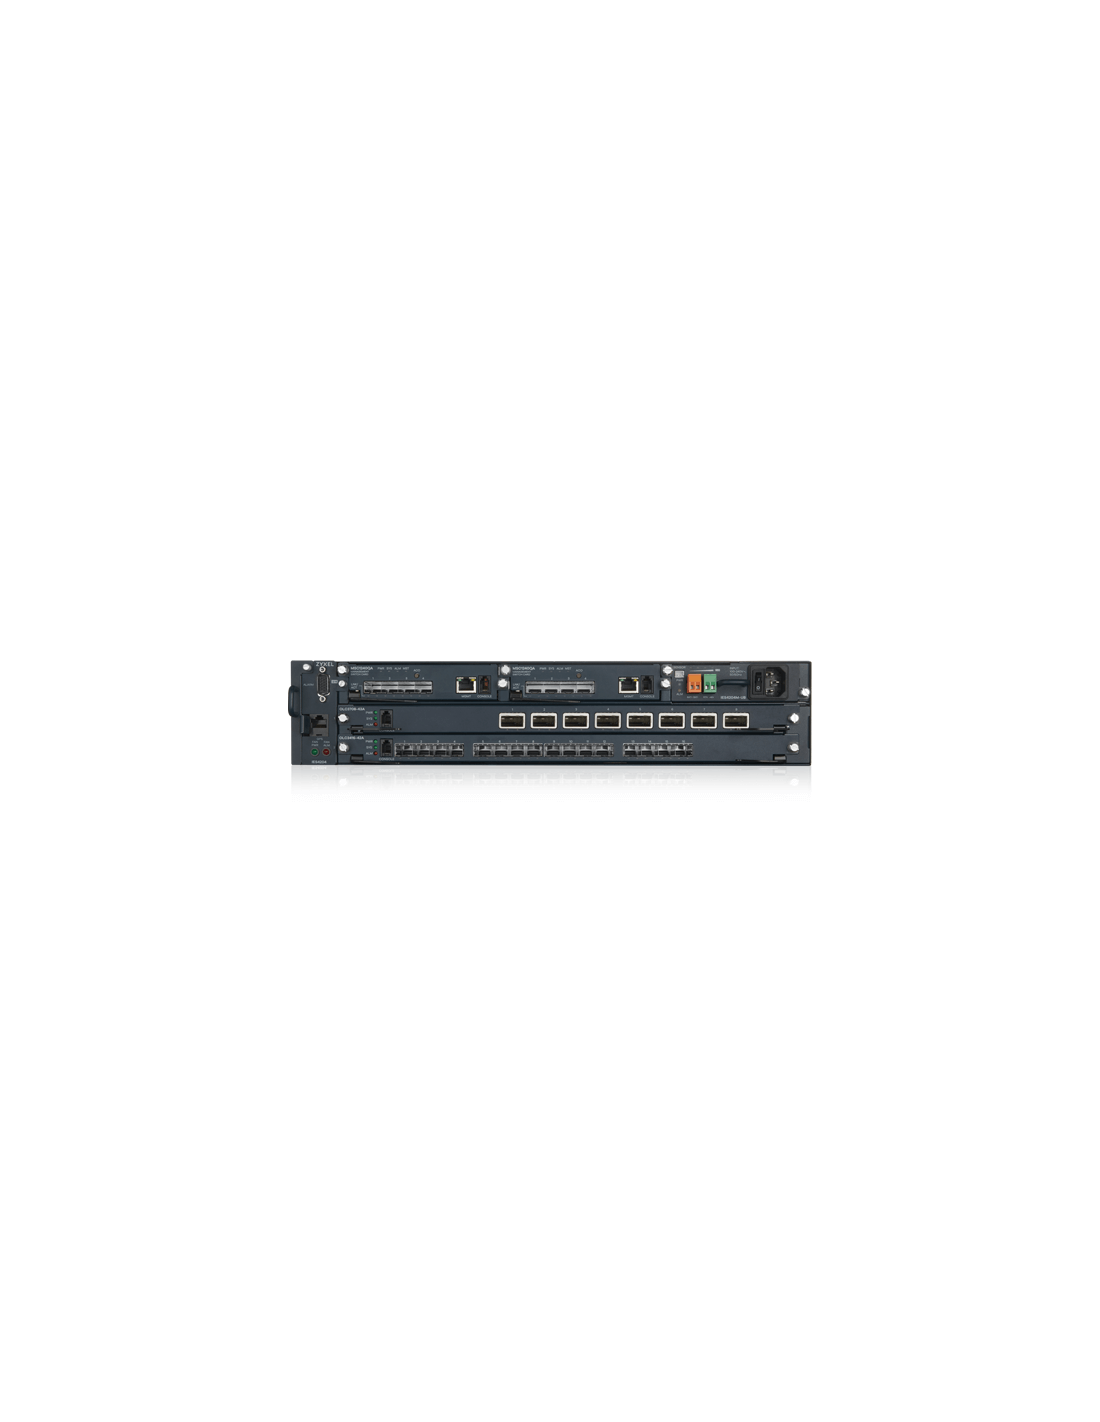 ZYXEL IES4204M, 2U 4-SLOT TEMPERATURE-HARDENED CHASSIS 